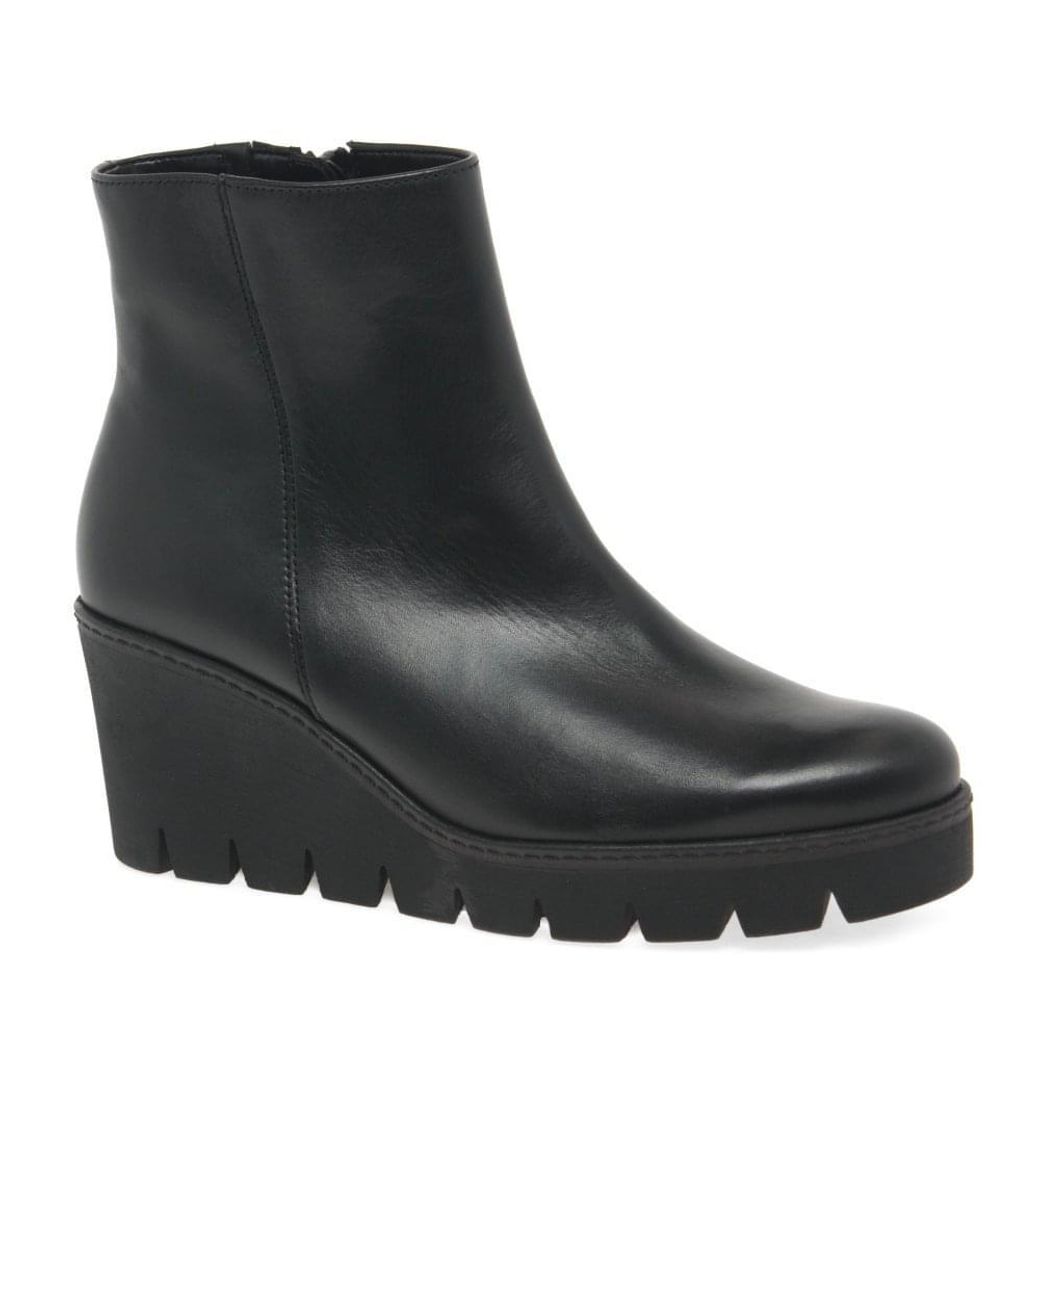 Gabor Utopia Wedge Heel Ankle Boots in Black | Lyst Canada